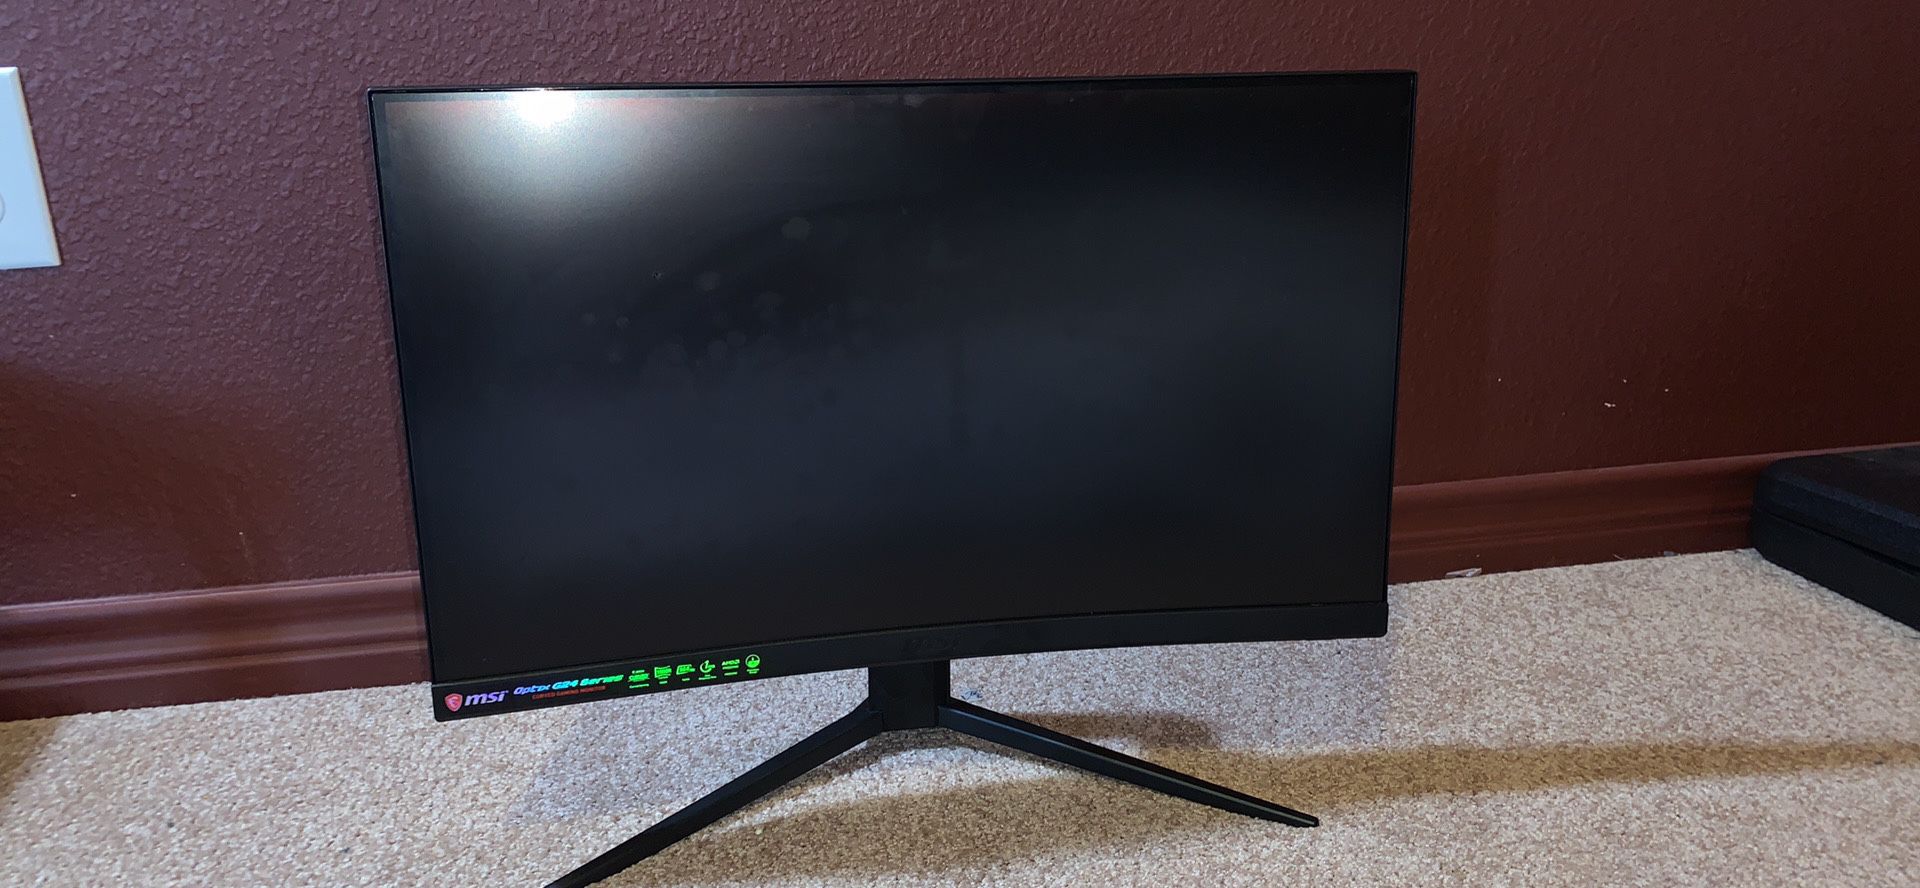 MSI curved gaming monitor 24 inch, 144hz , G24c